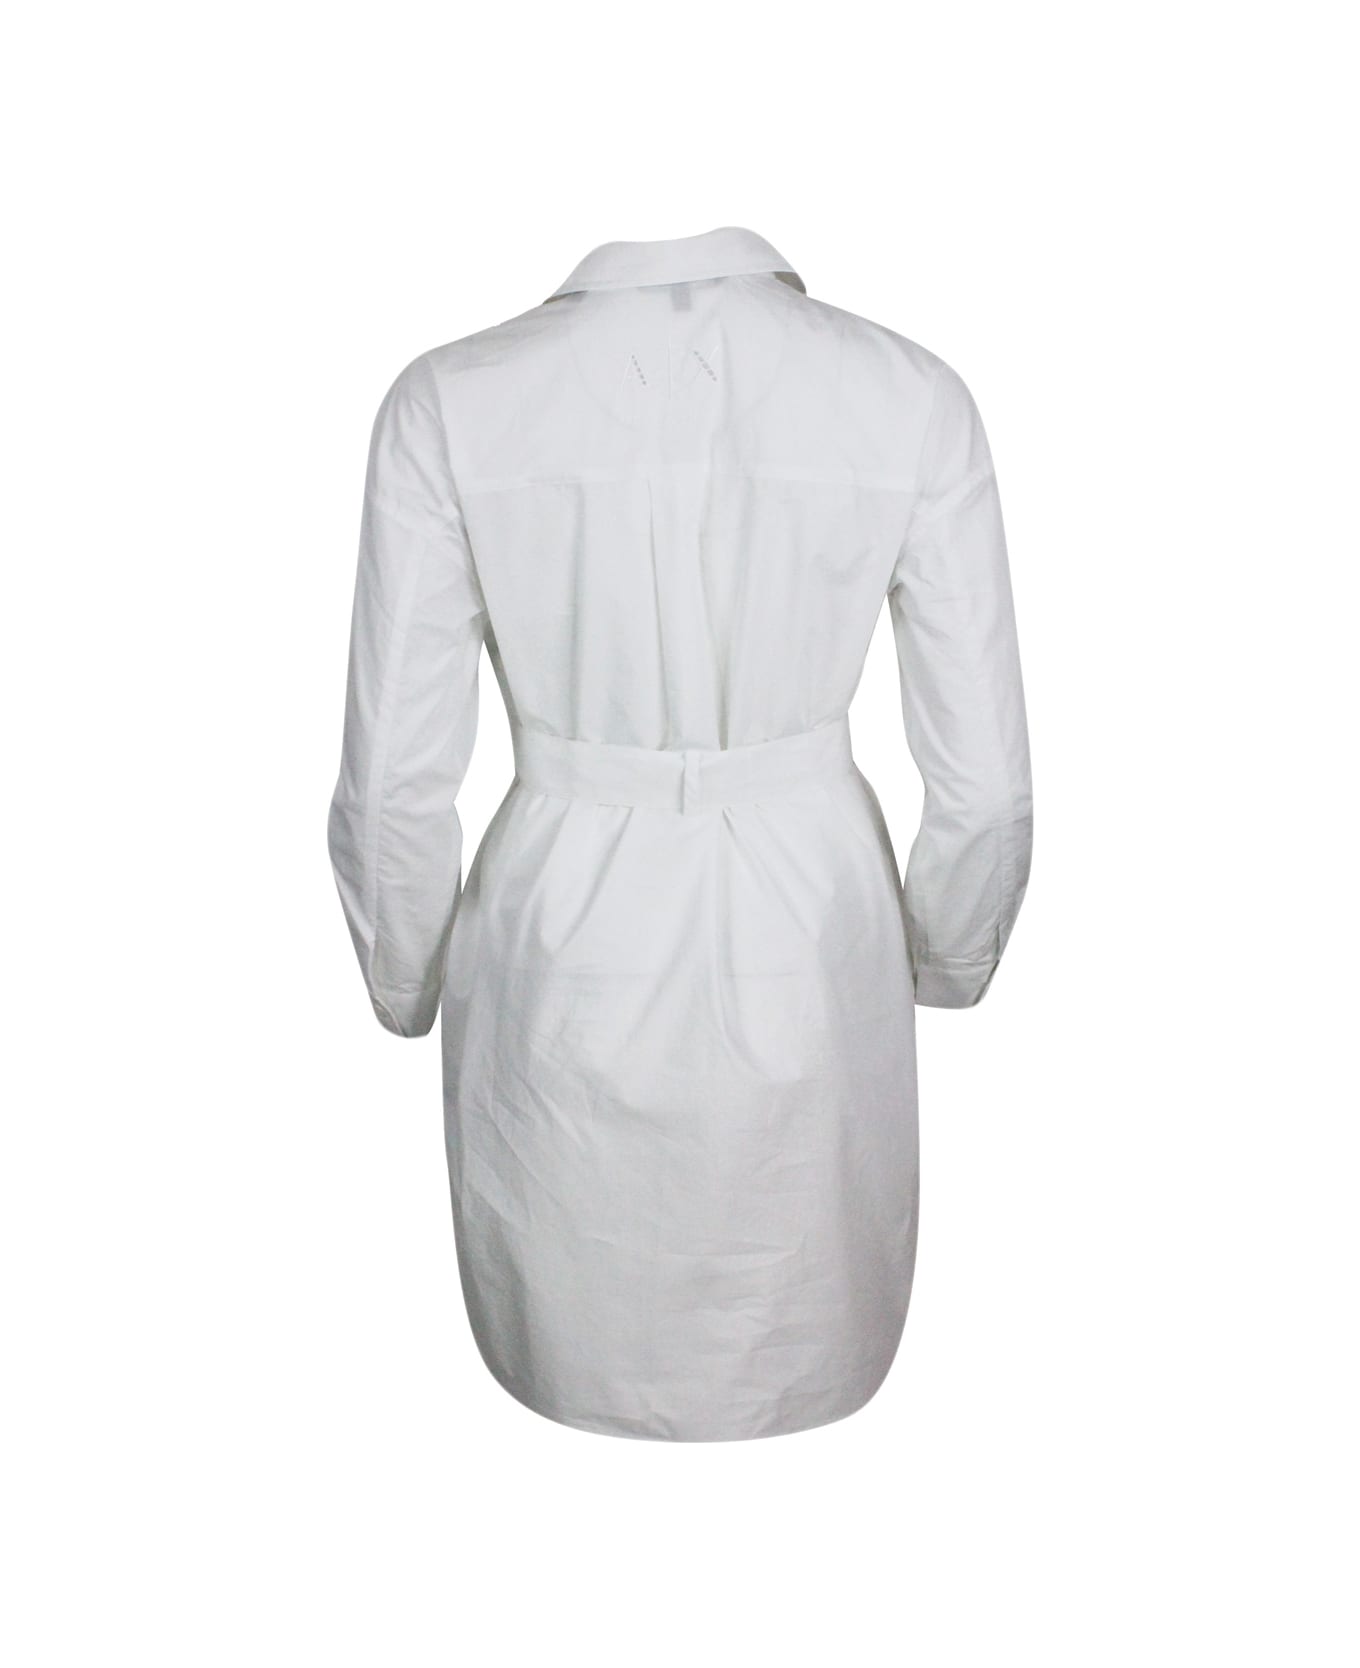 Armani Collezioni Dress Made Of Soft Cotton With Long Sleeves, With Button Closure On The Front And Belt. - White ワンピース＆ドレス